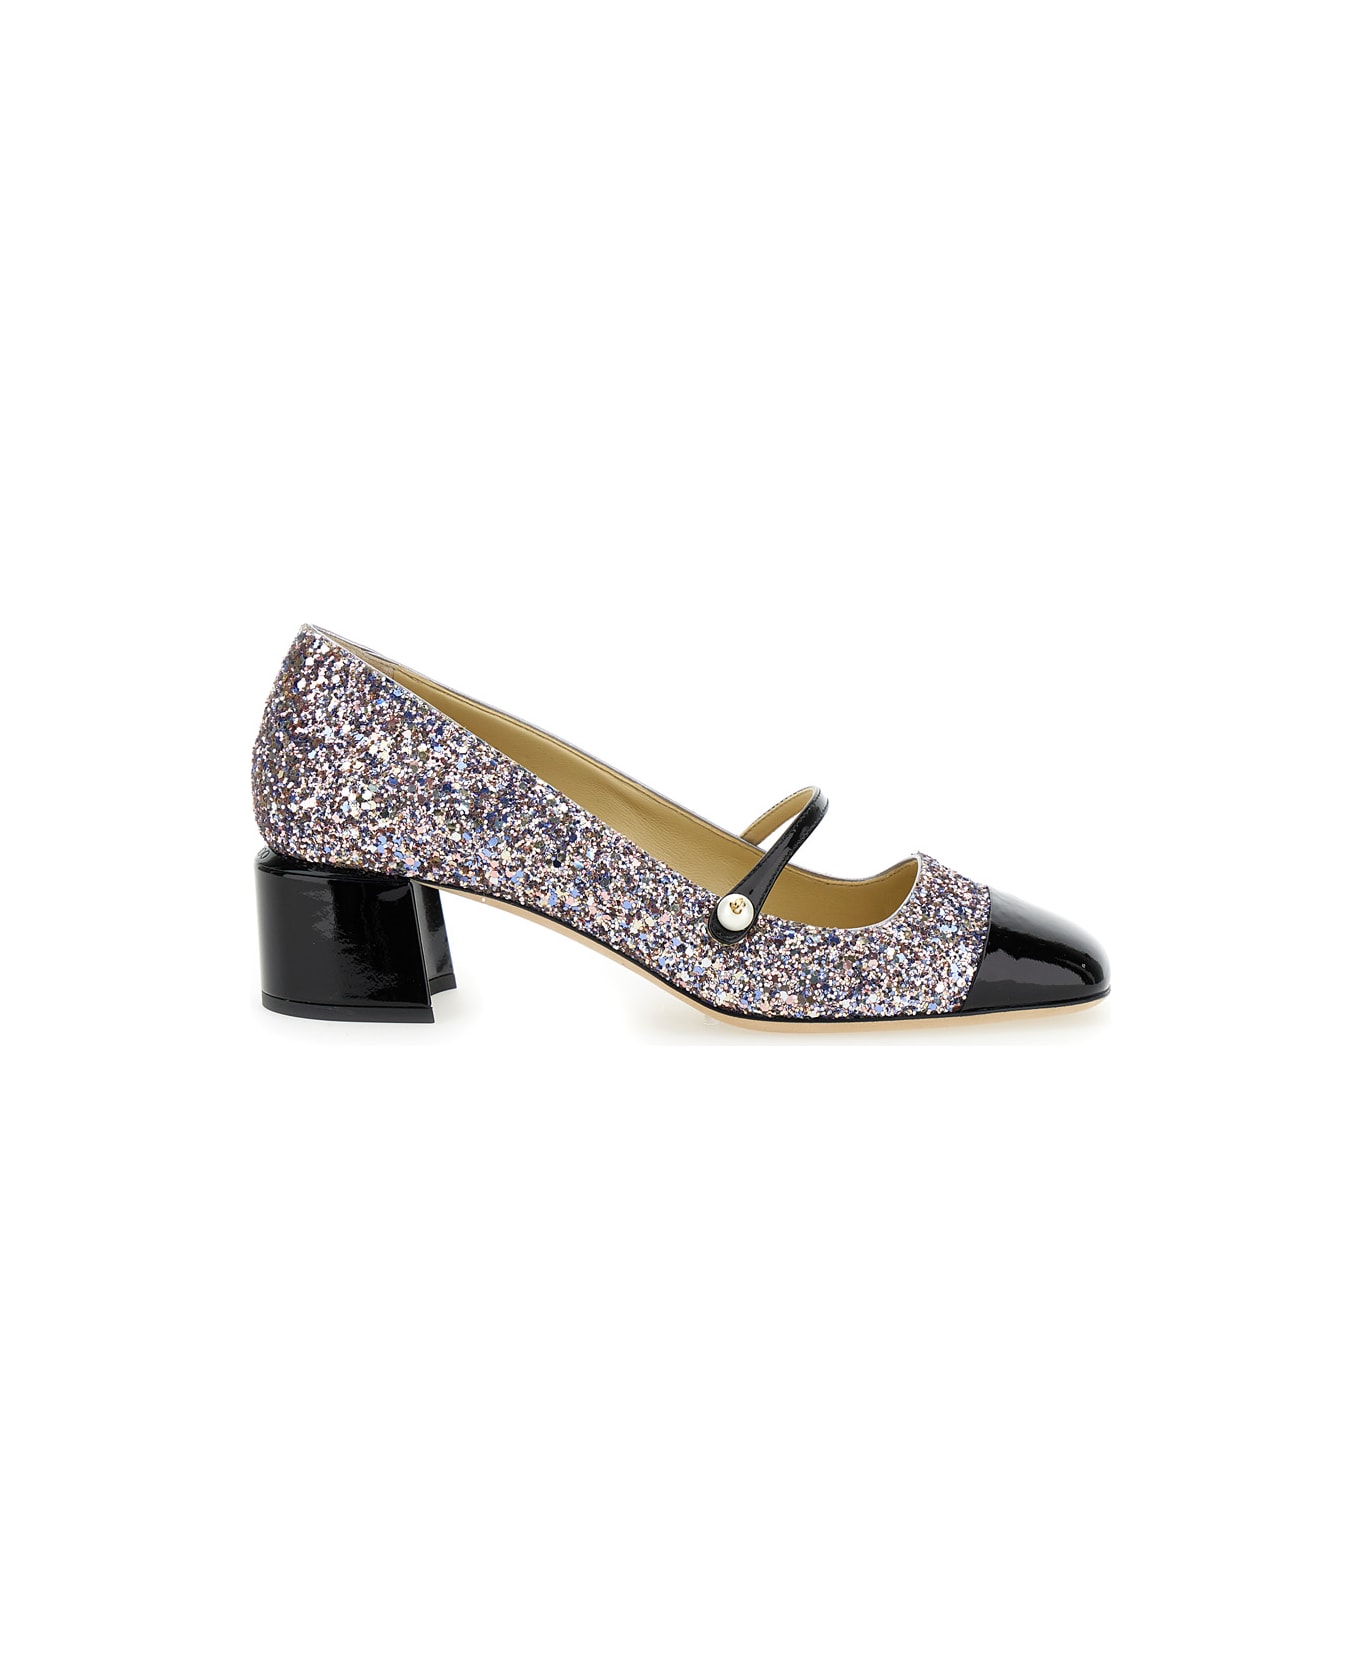 Jimmy Choo 'elisa 45' Multicolor Pumps With Block Heel In Glitter Fabric And Patent Leather Woman - Multicolor ハイヒール